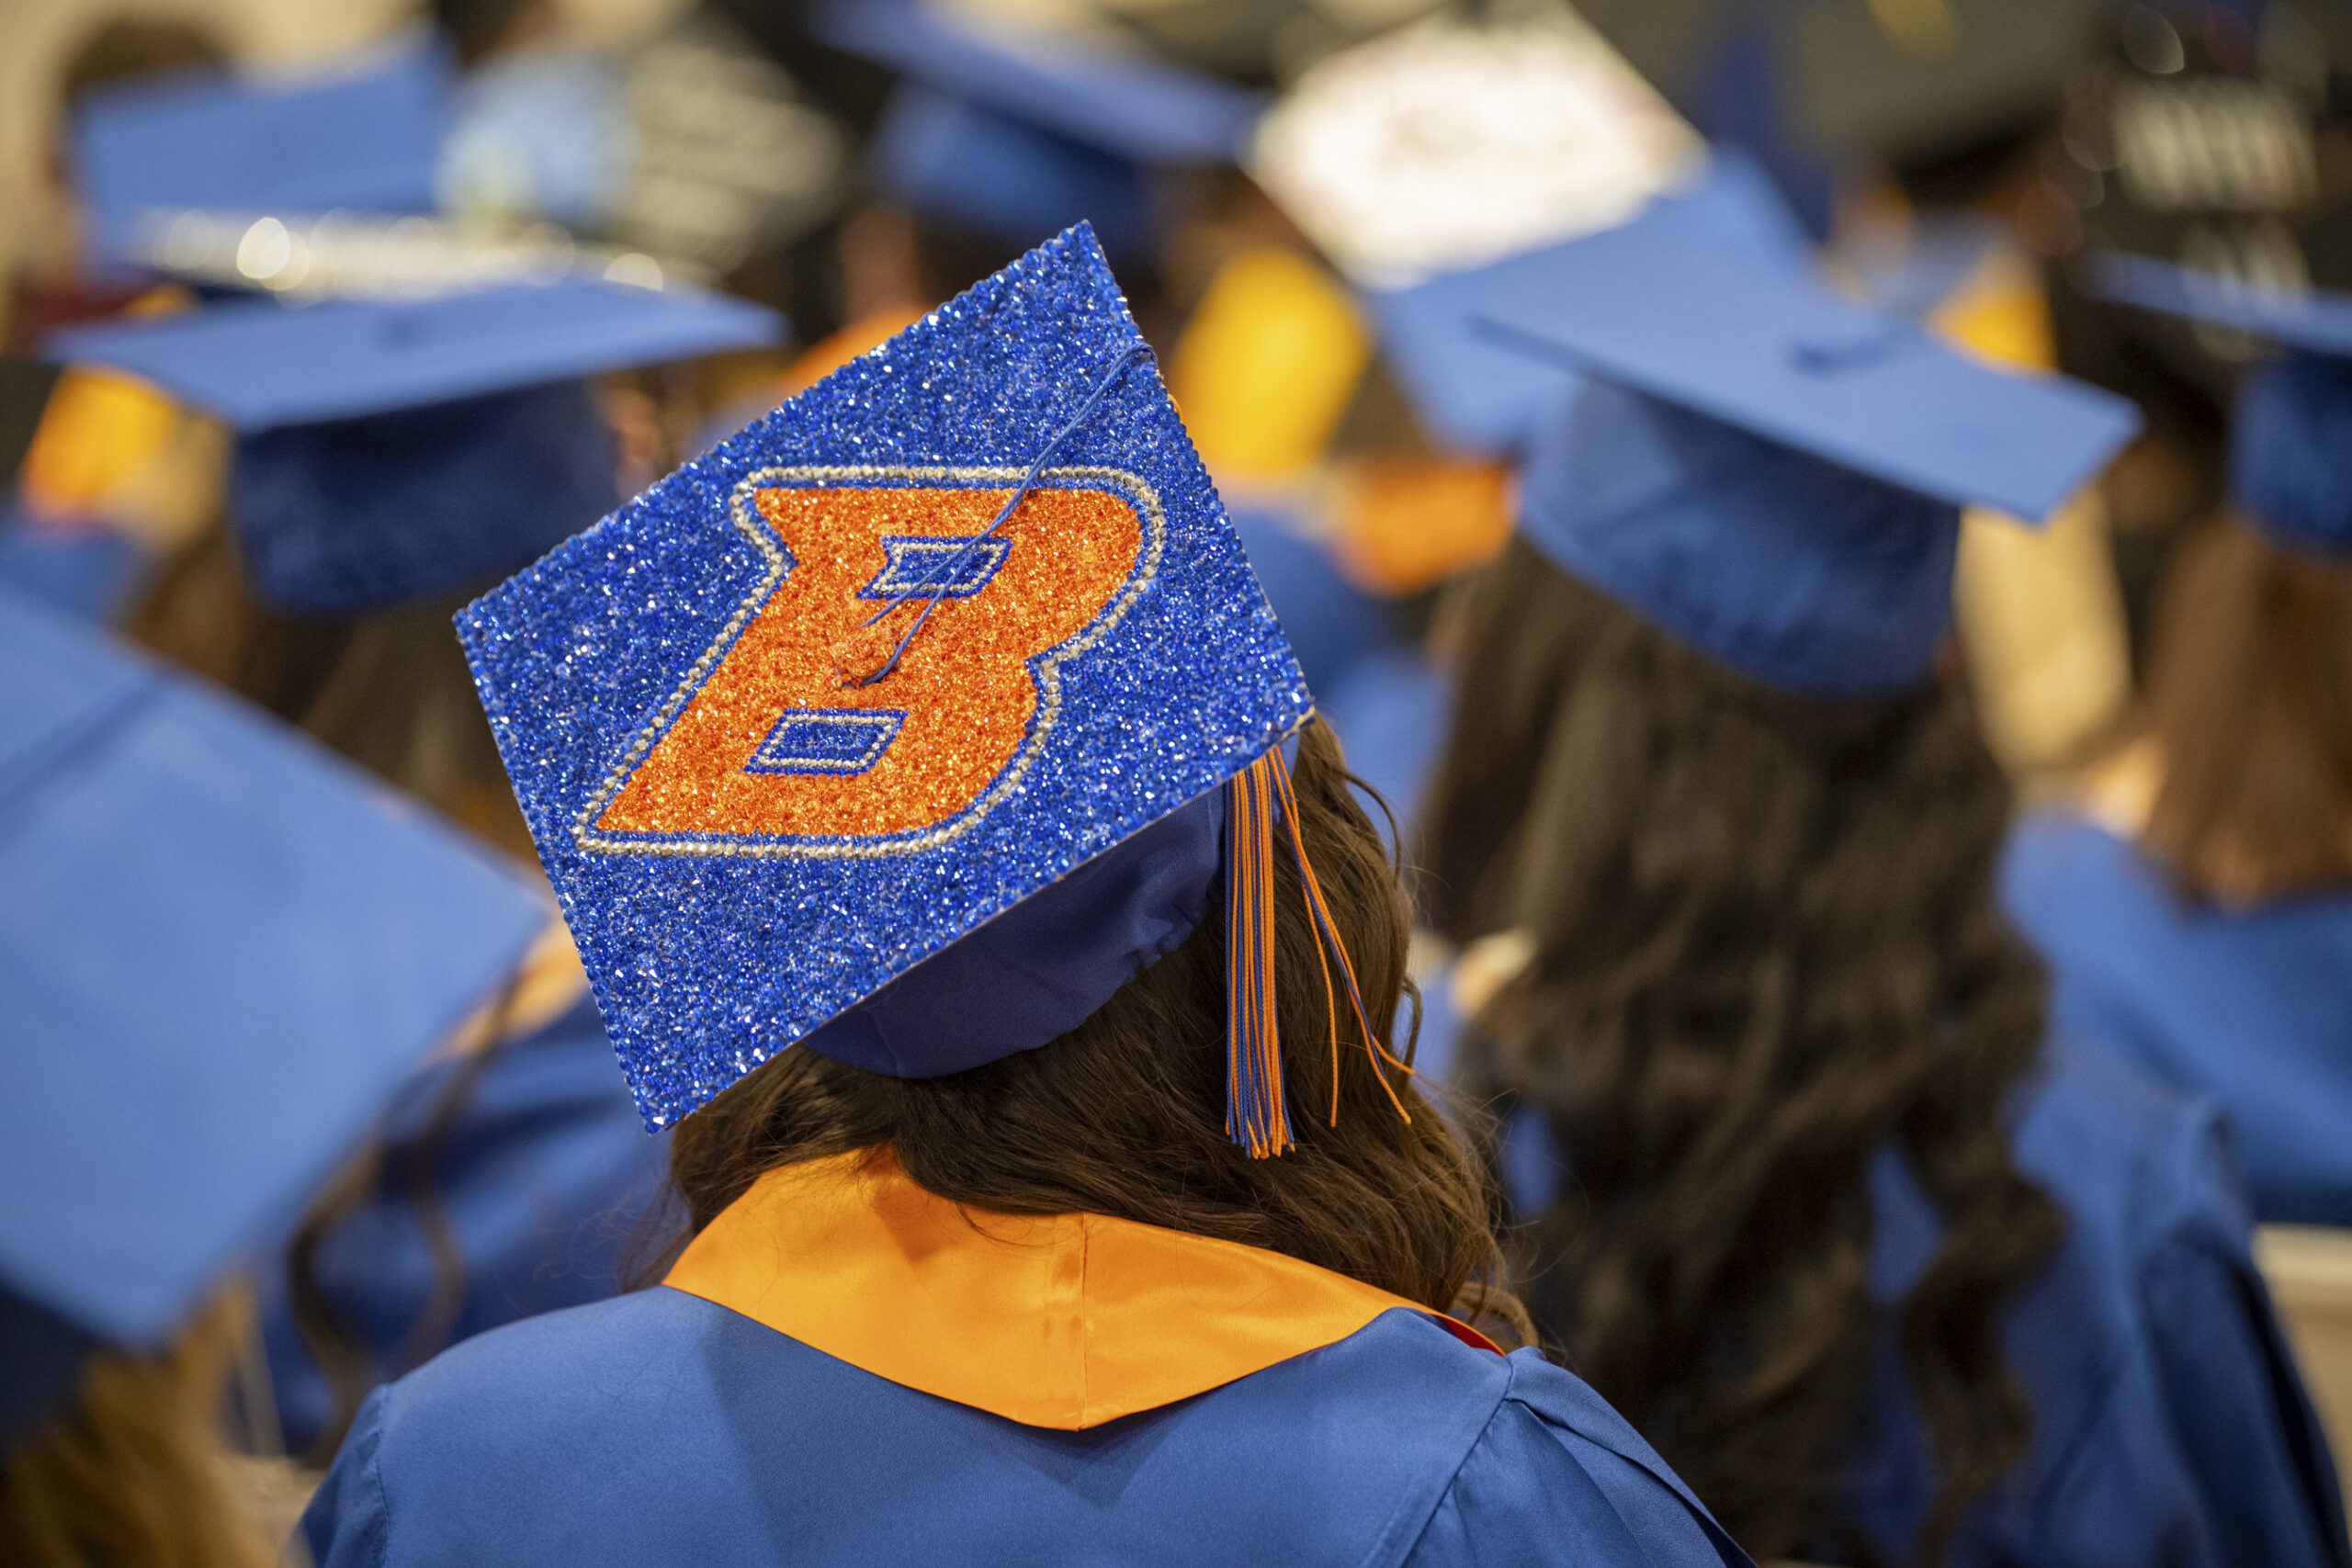 Boise State Winter Commencement, morning session, photo by Priscilla Grover